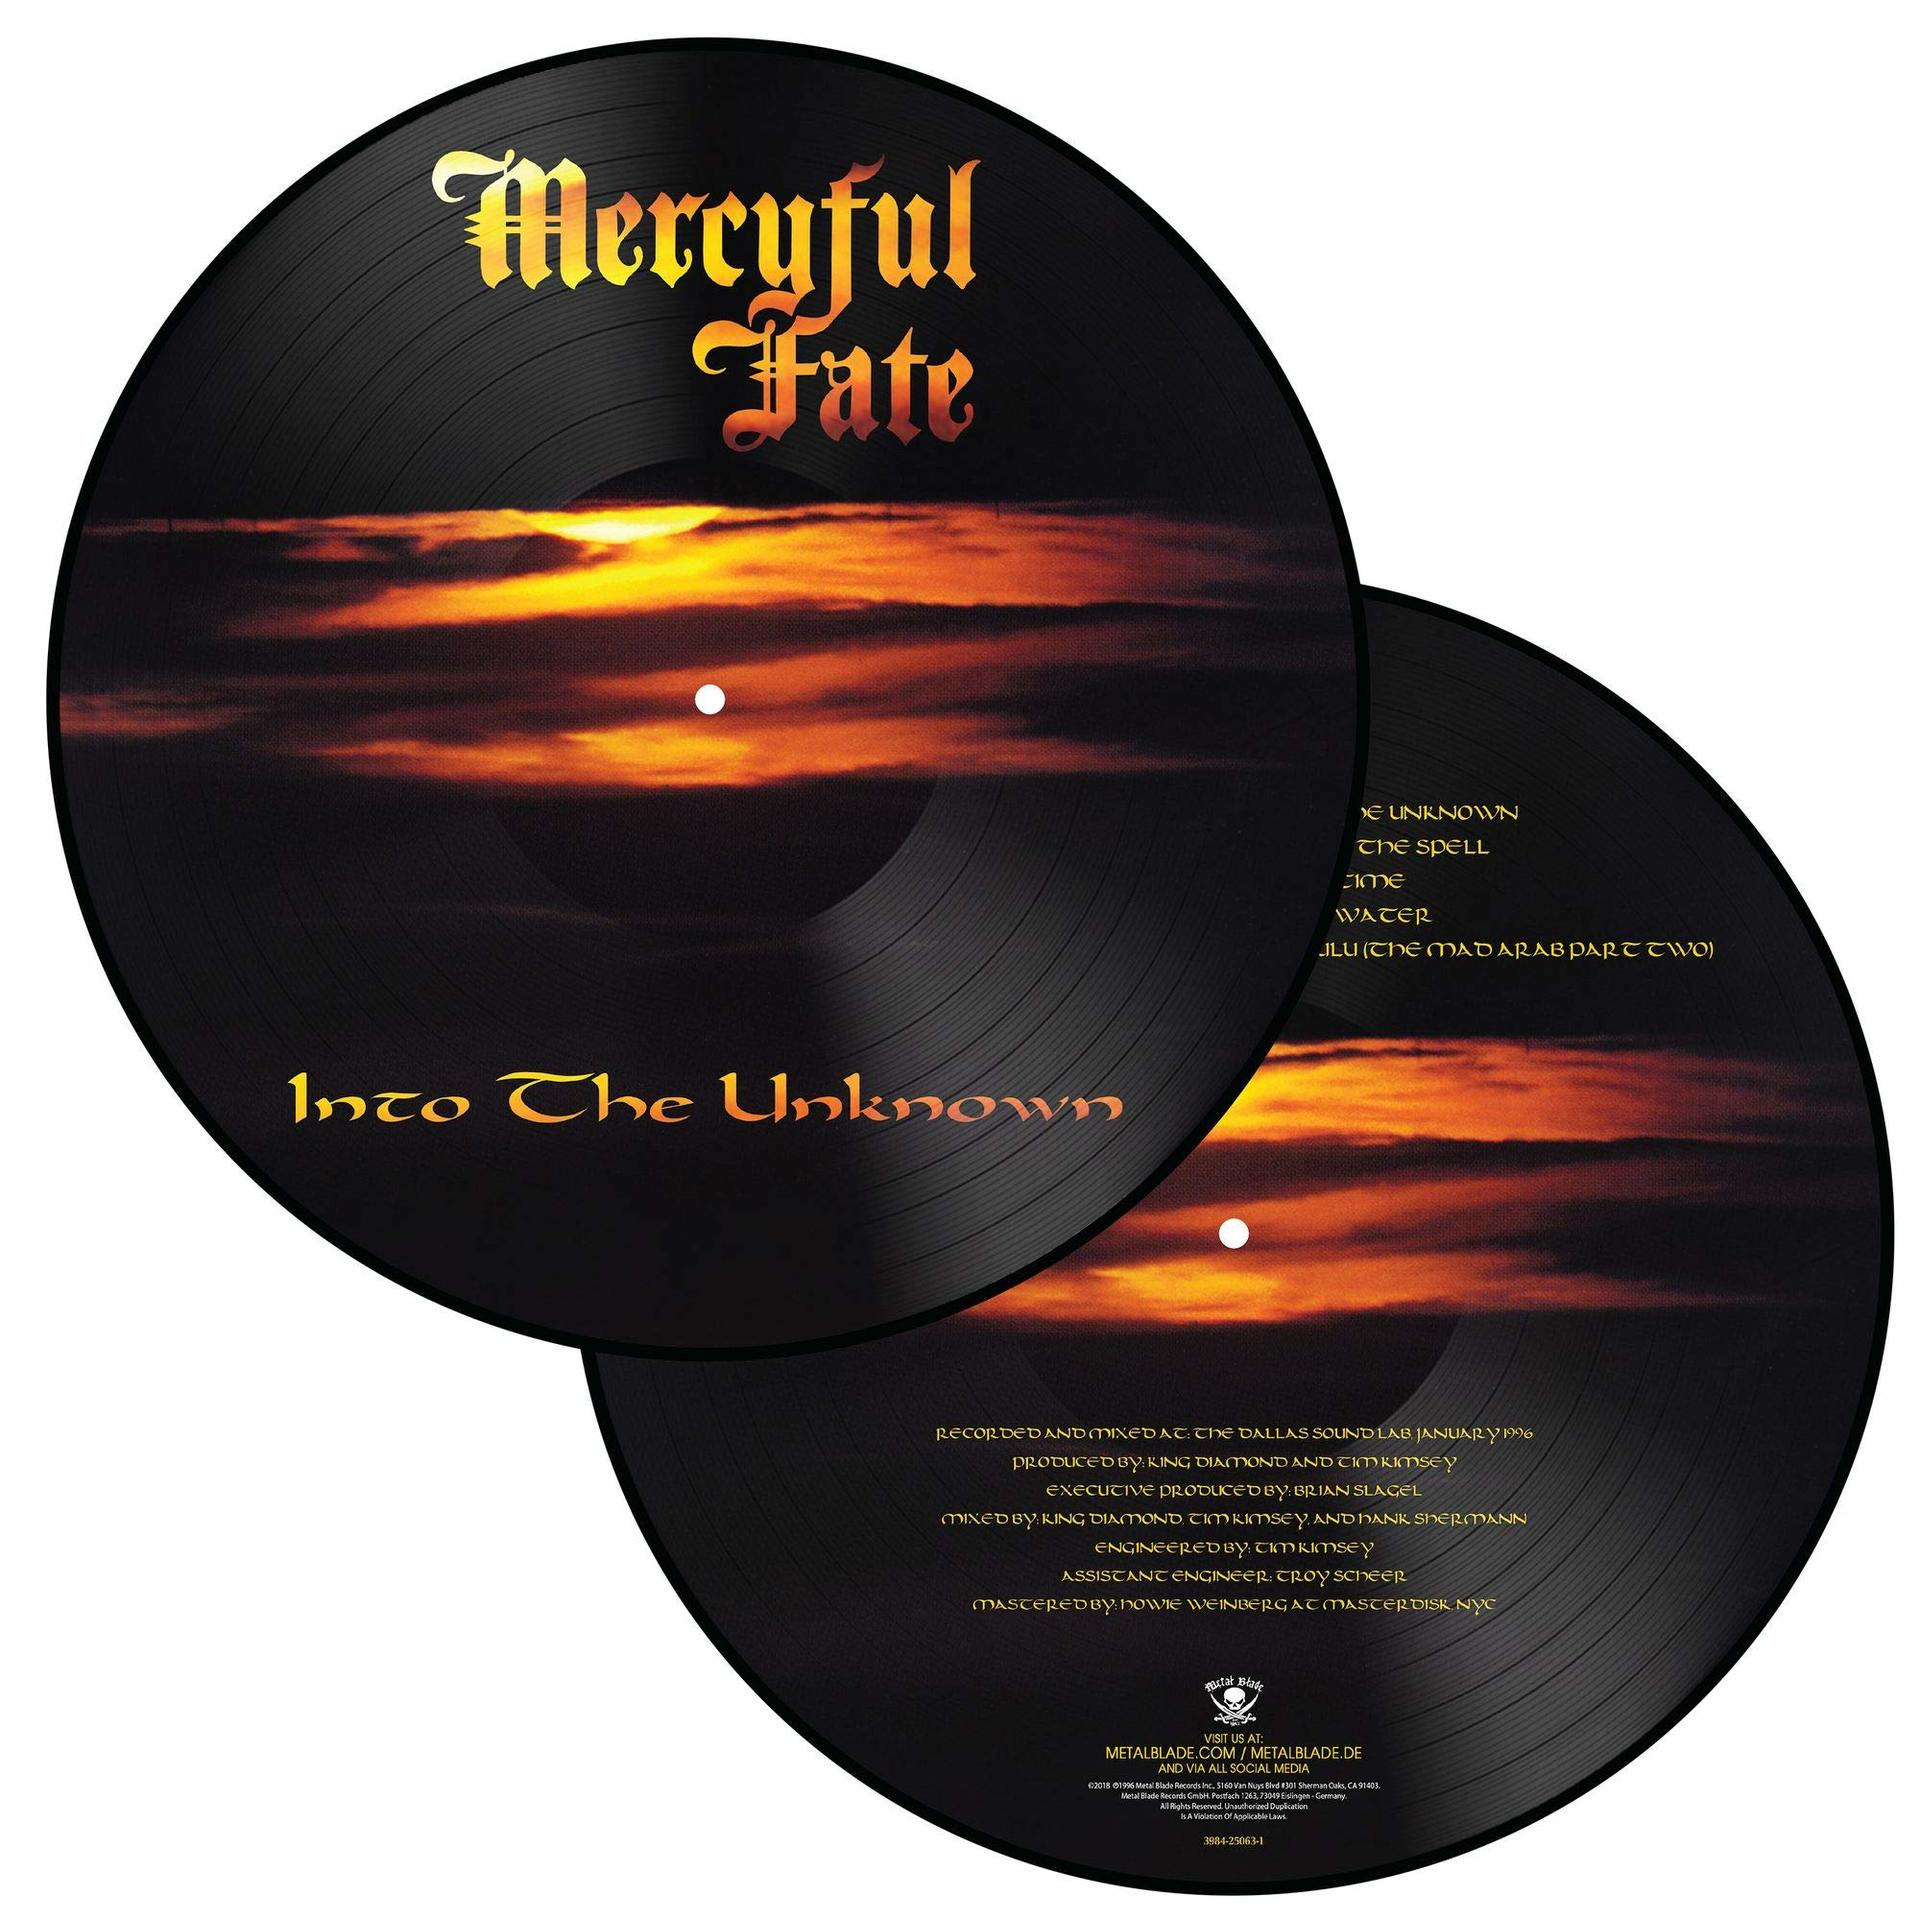 Mercyful - (Vinyl) Disc) Fate The (Picture - Into Unknown